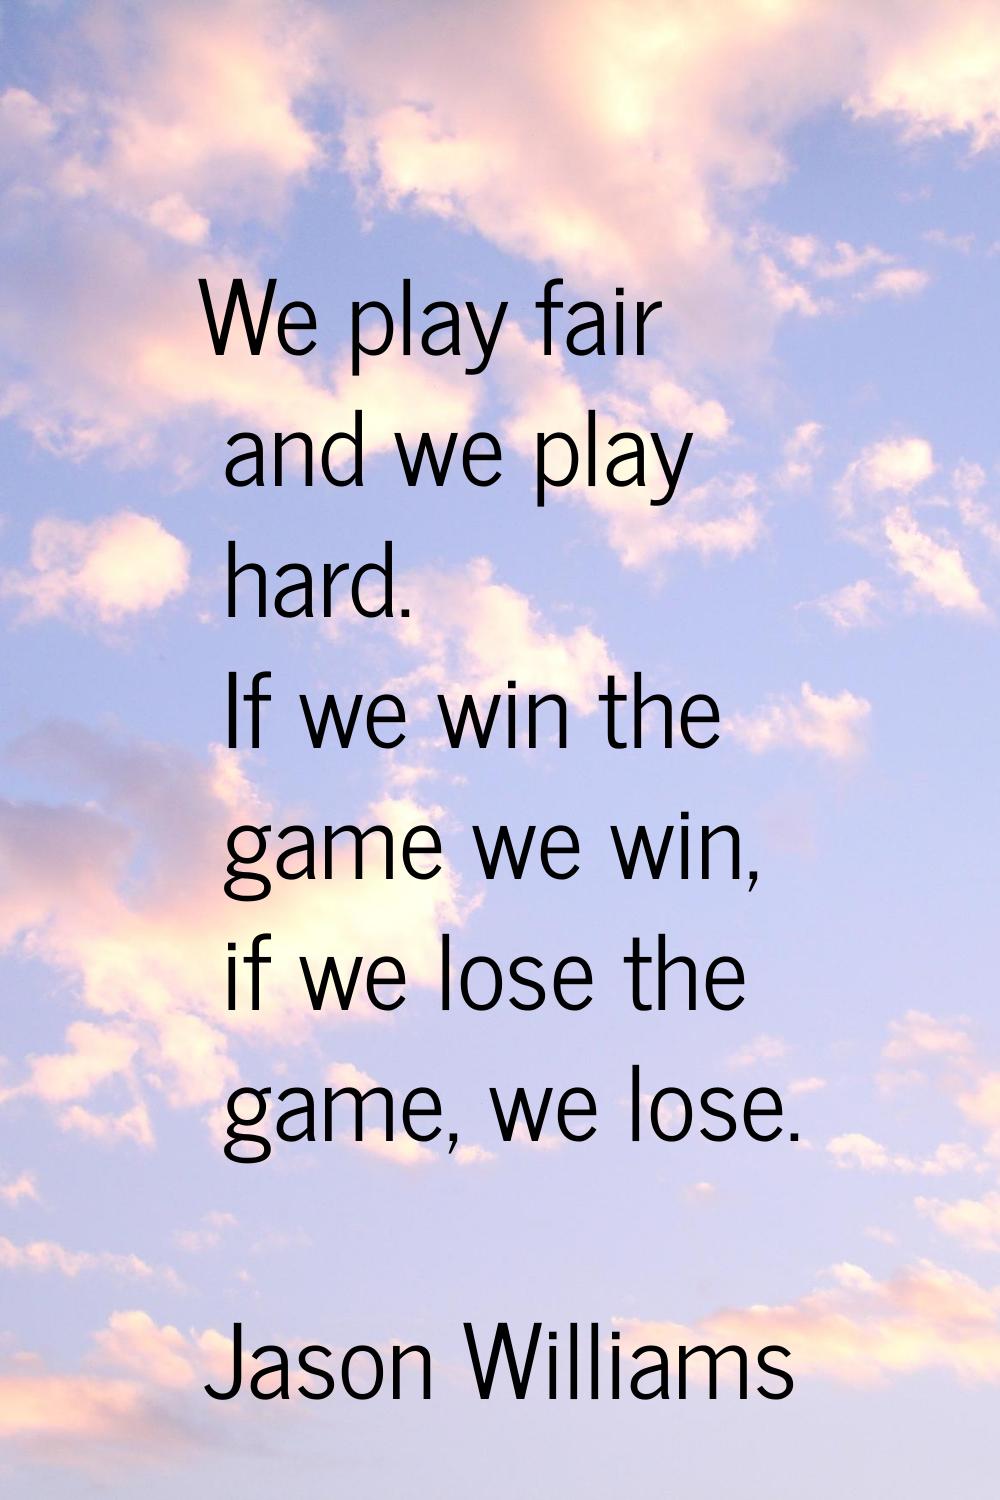 We play fair and we play hard. If we win the game we win, if we lose the game, we lose.